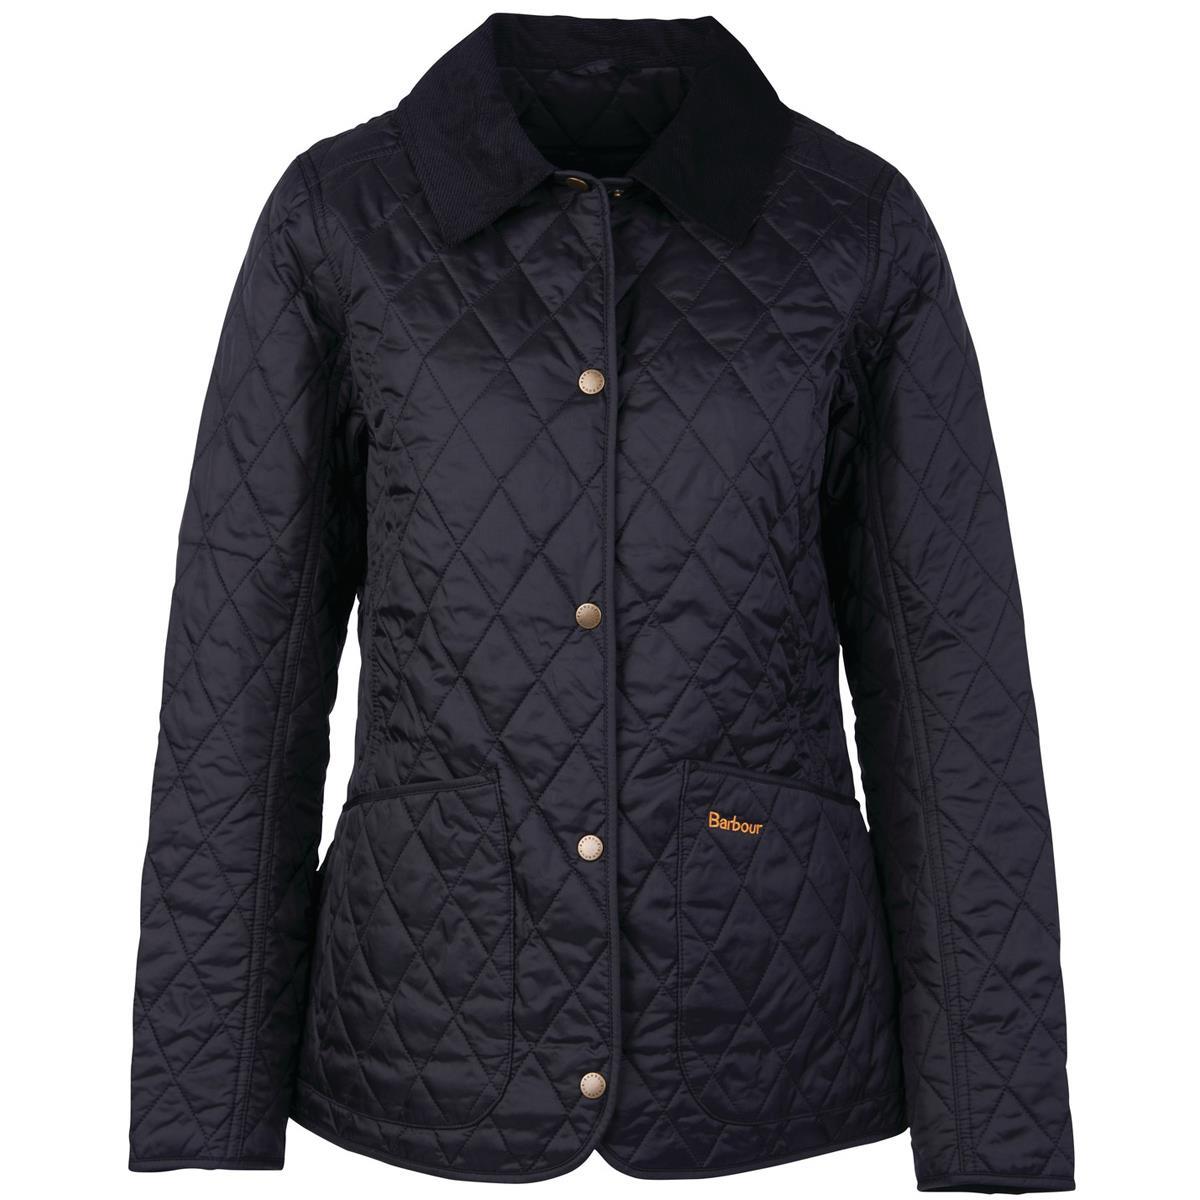 How does the Barbour Annandale Quilted Jacket deliver warmth?